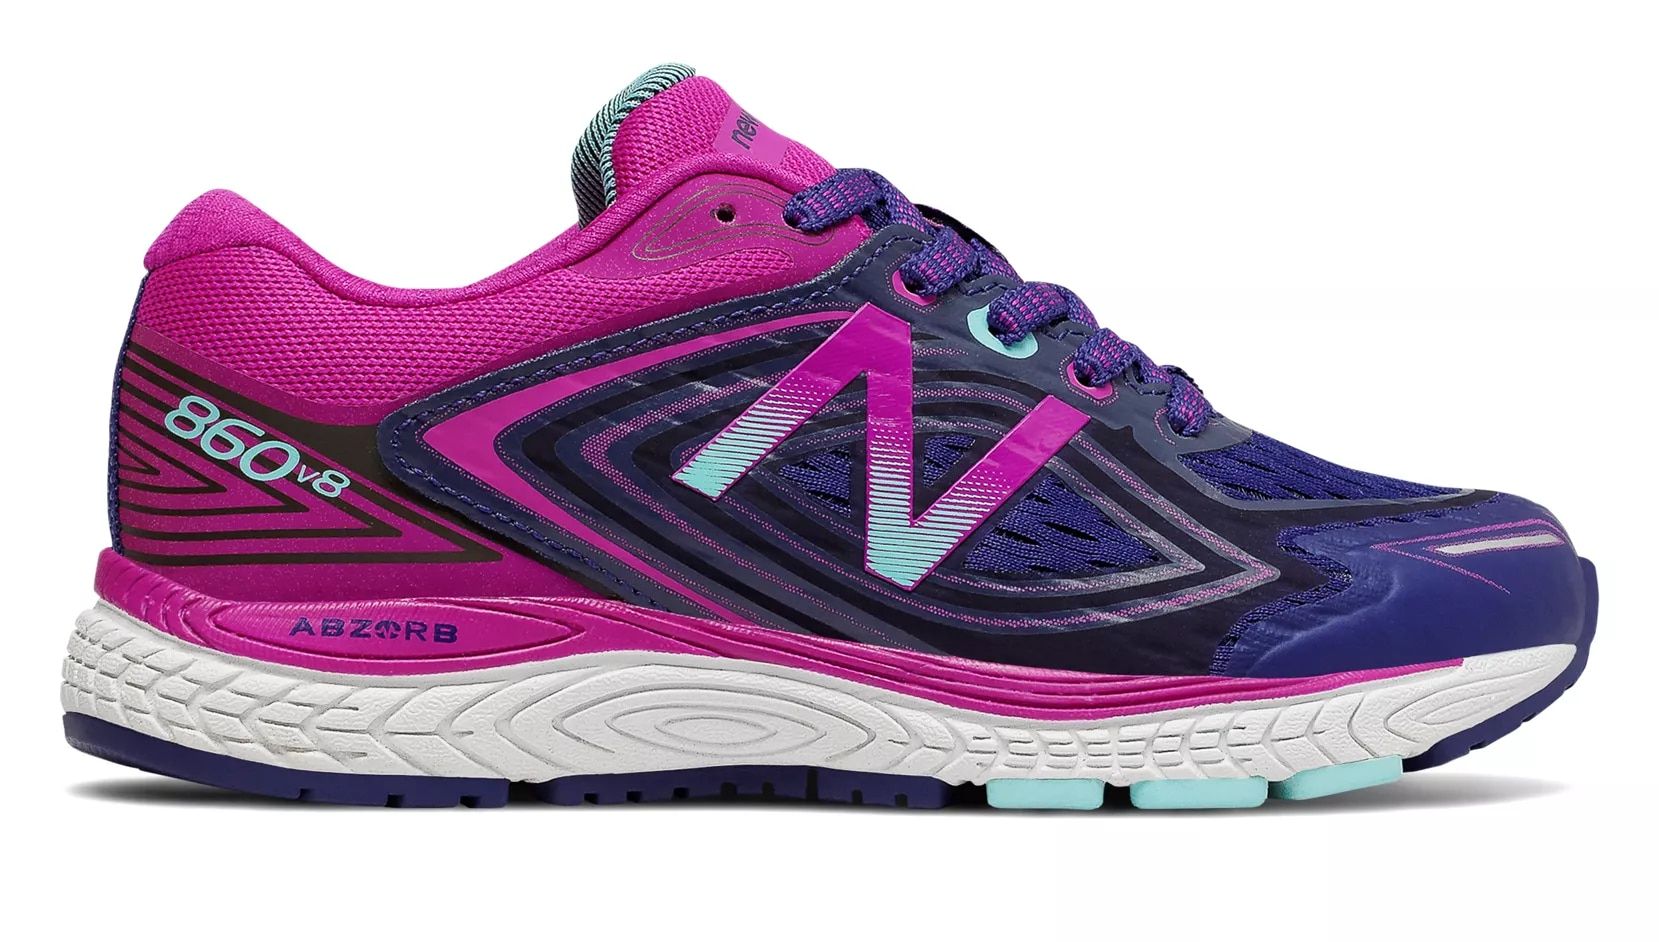 The New Balance 860v8 Offers Stability